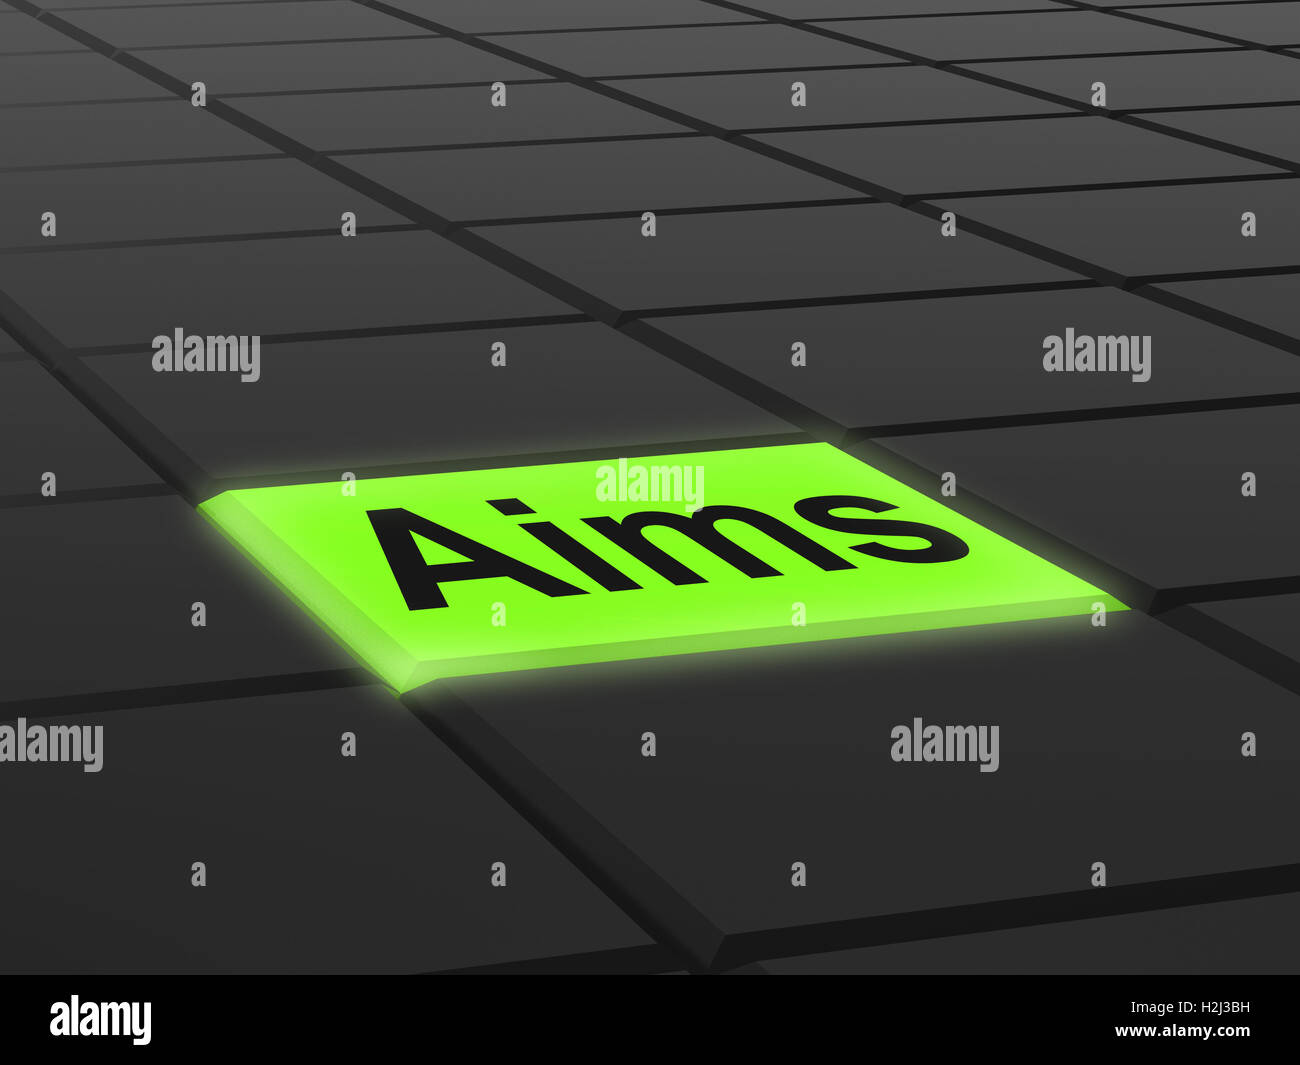 Aims Button Shows Targeting Purpose And Aspiration Stock Photo